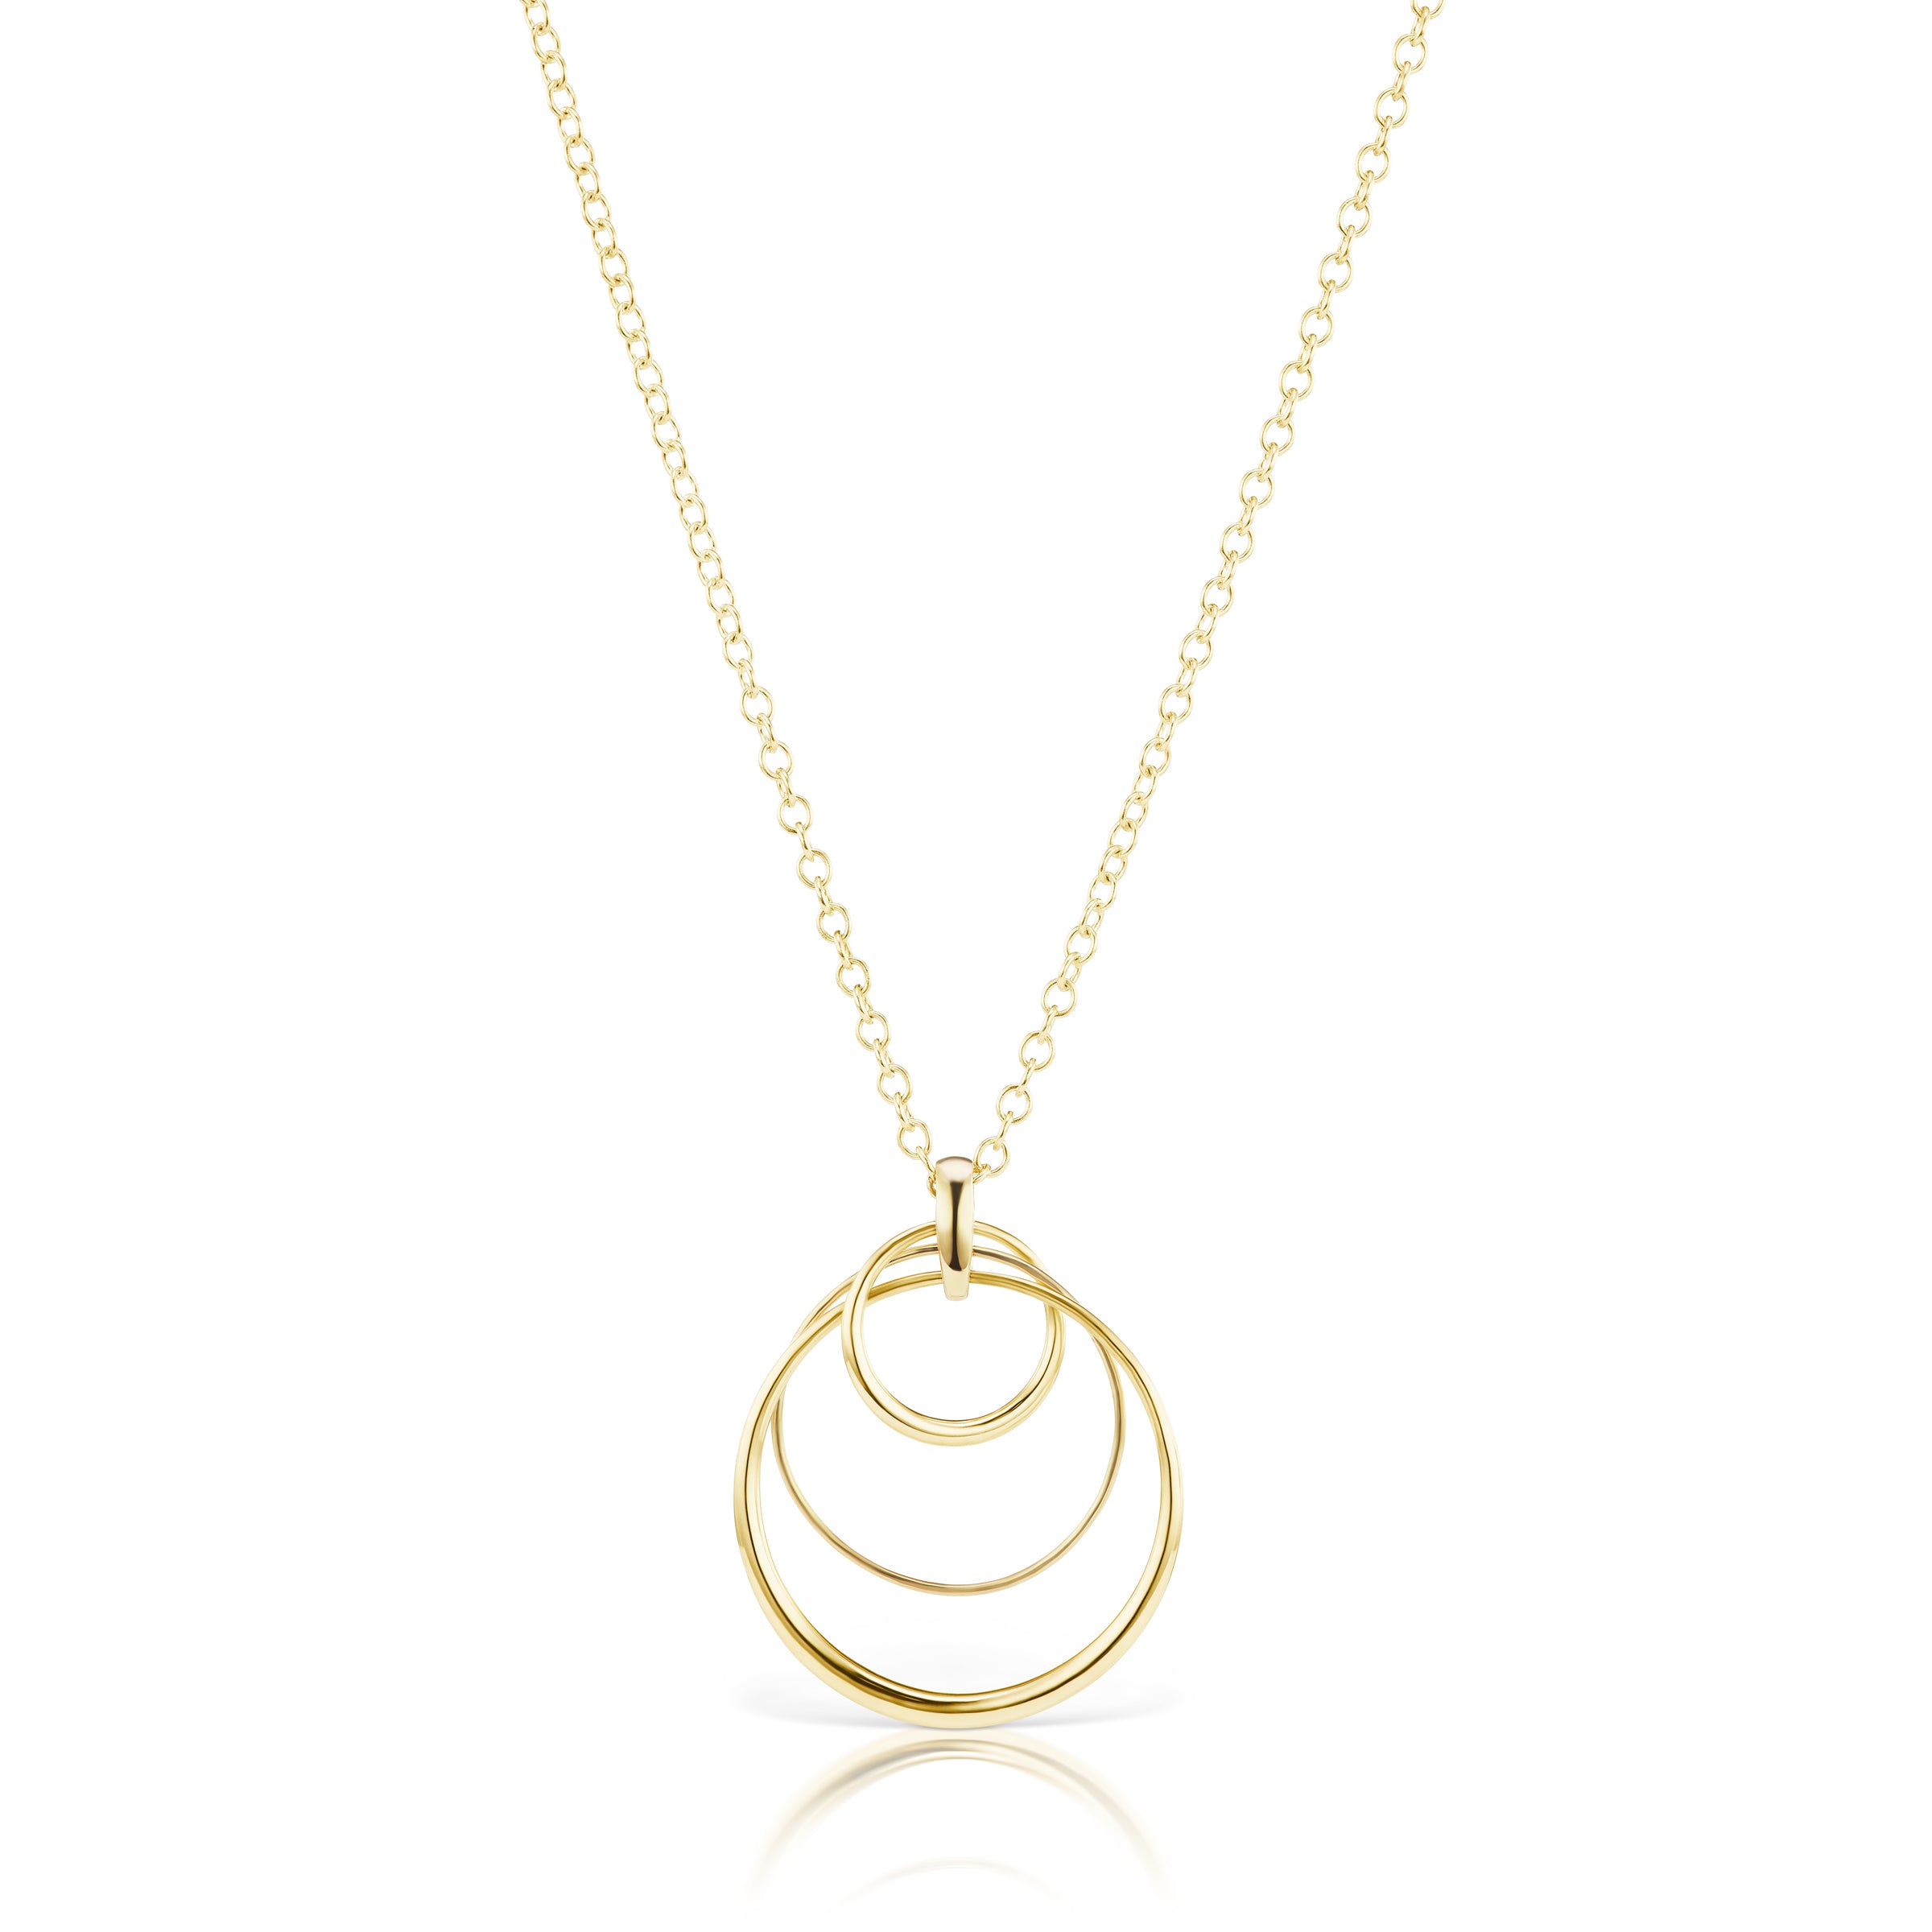 The Gold Party Loop Necklace